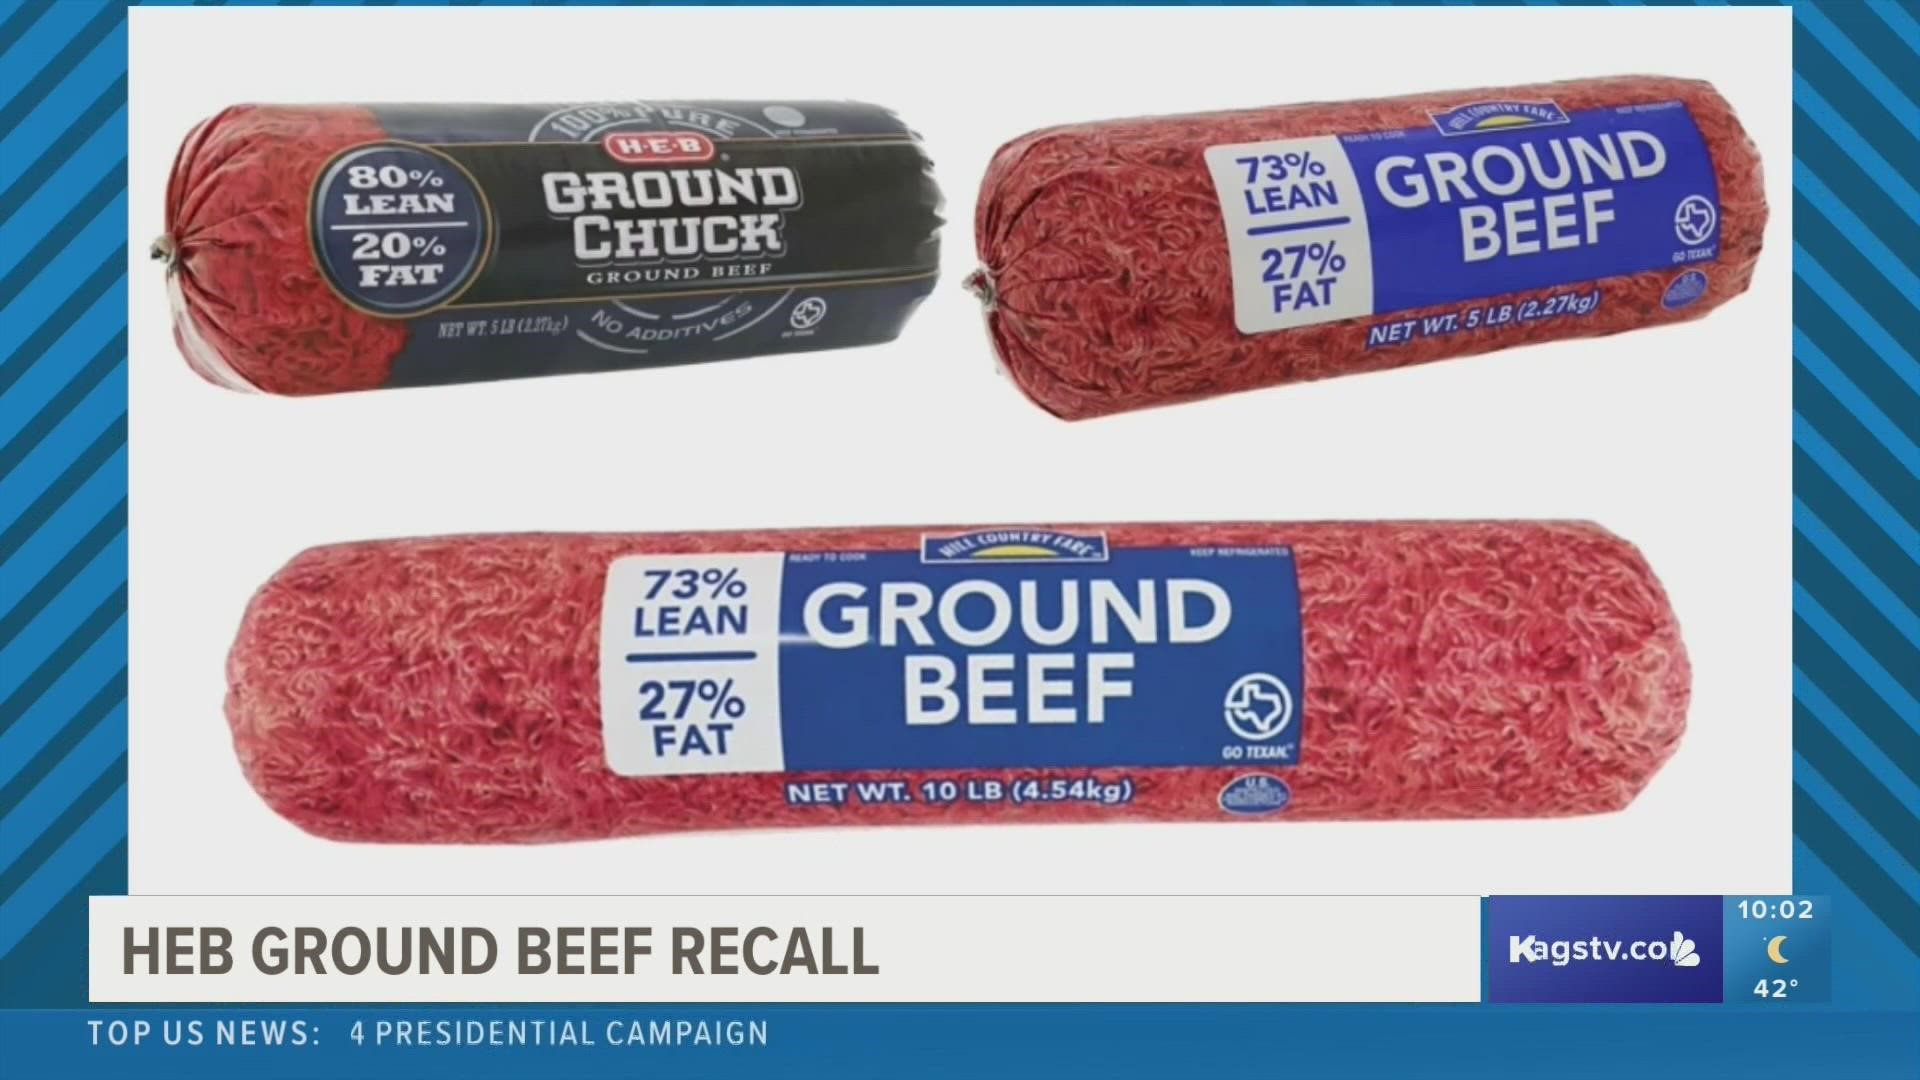 The grocery store chain said the ground beef involves 5-and 10-pound chubs of the Hill Country Fare 73% lean ground beef, and the 80% lean ground chucks.